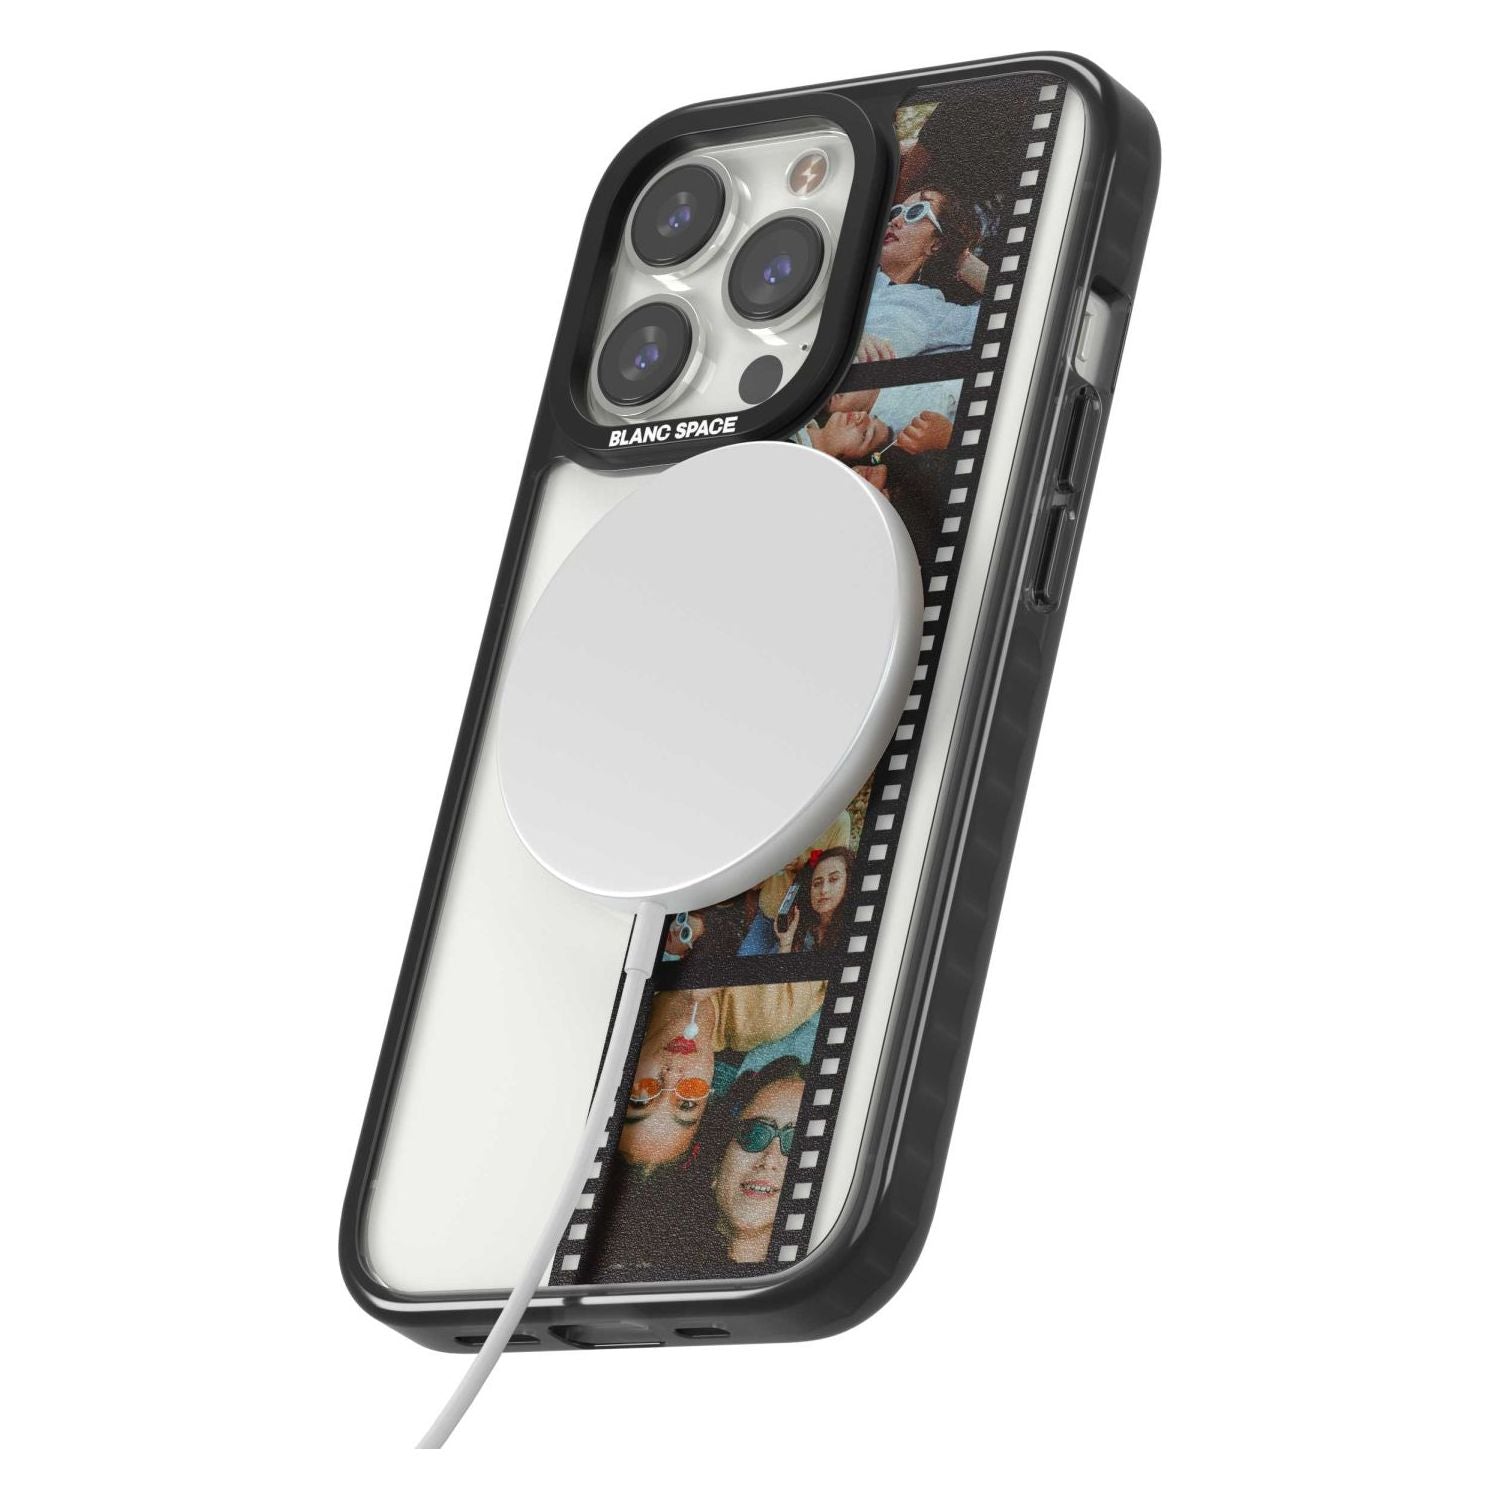 Personalised Instant Camera Photo iPhone Case